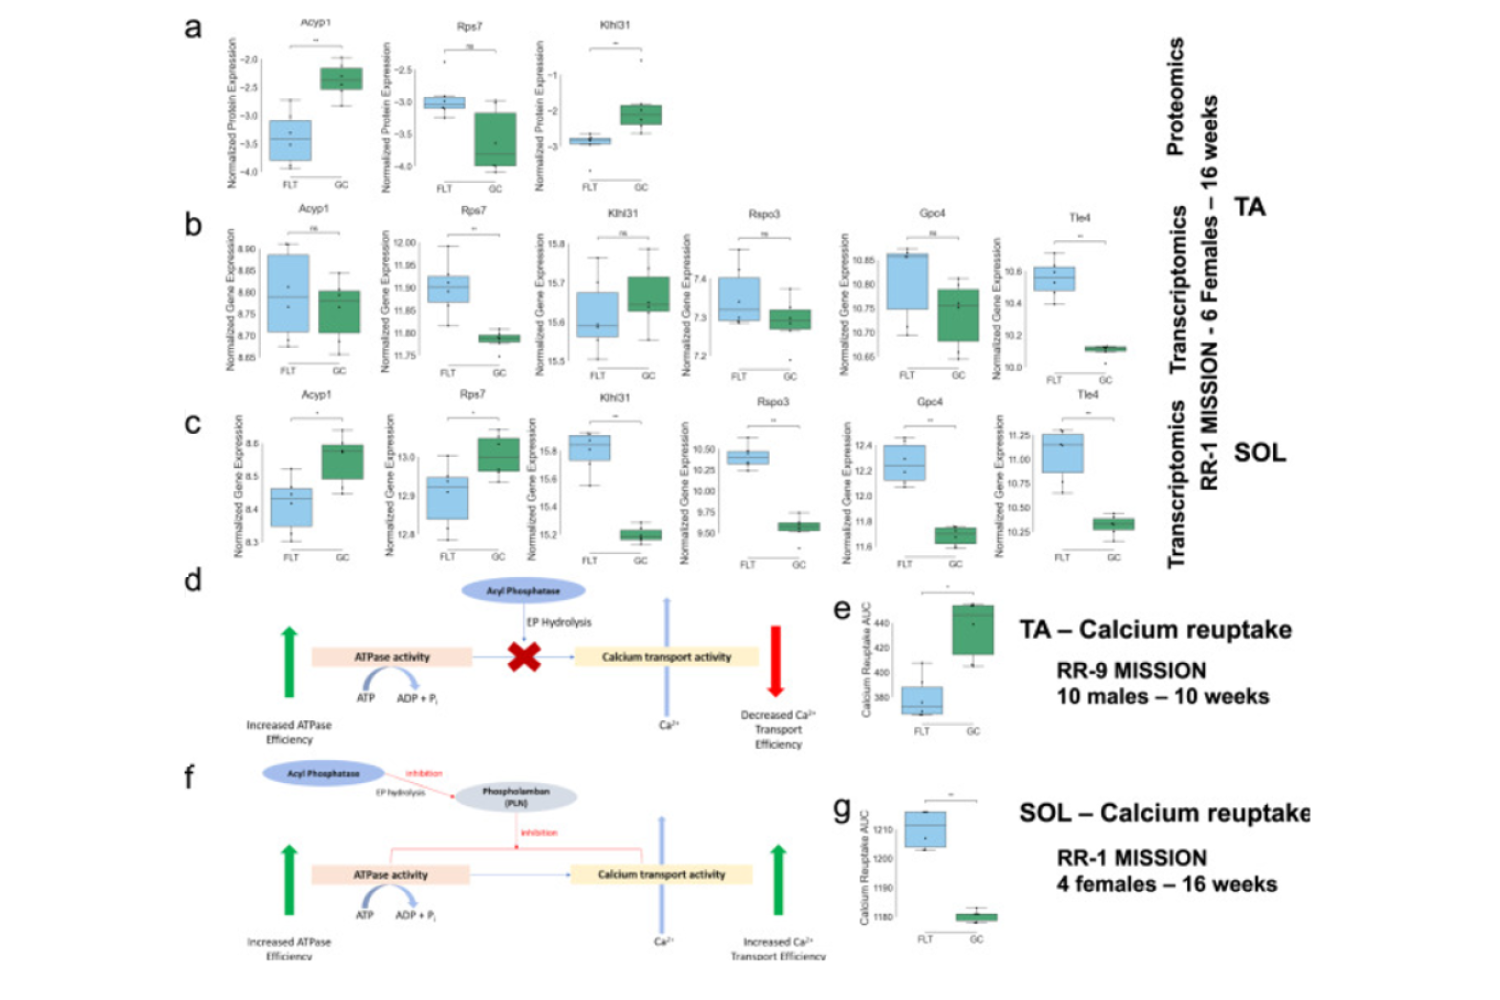 Gene/protein relationship with calcium reuptake in SOL and TA muscles and putative mechanism.